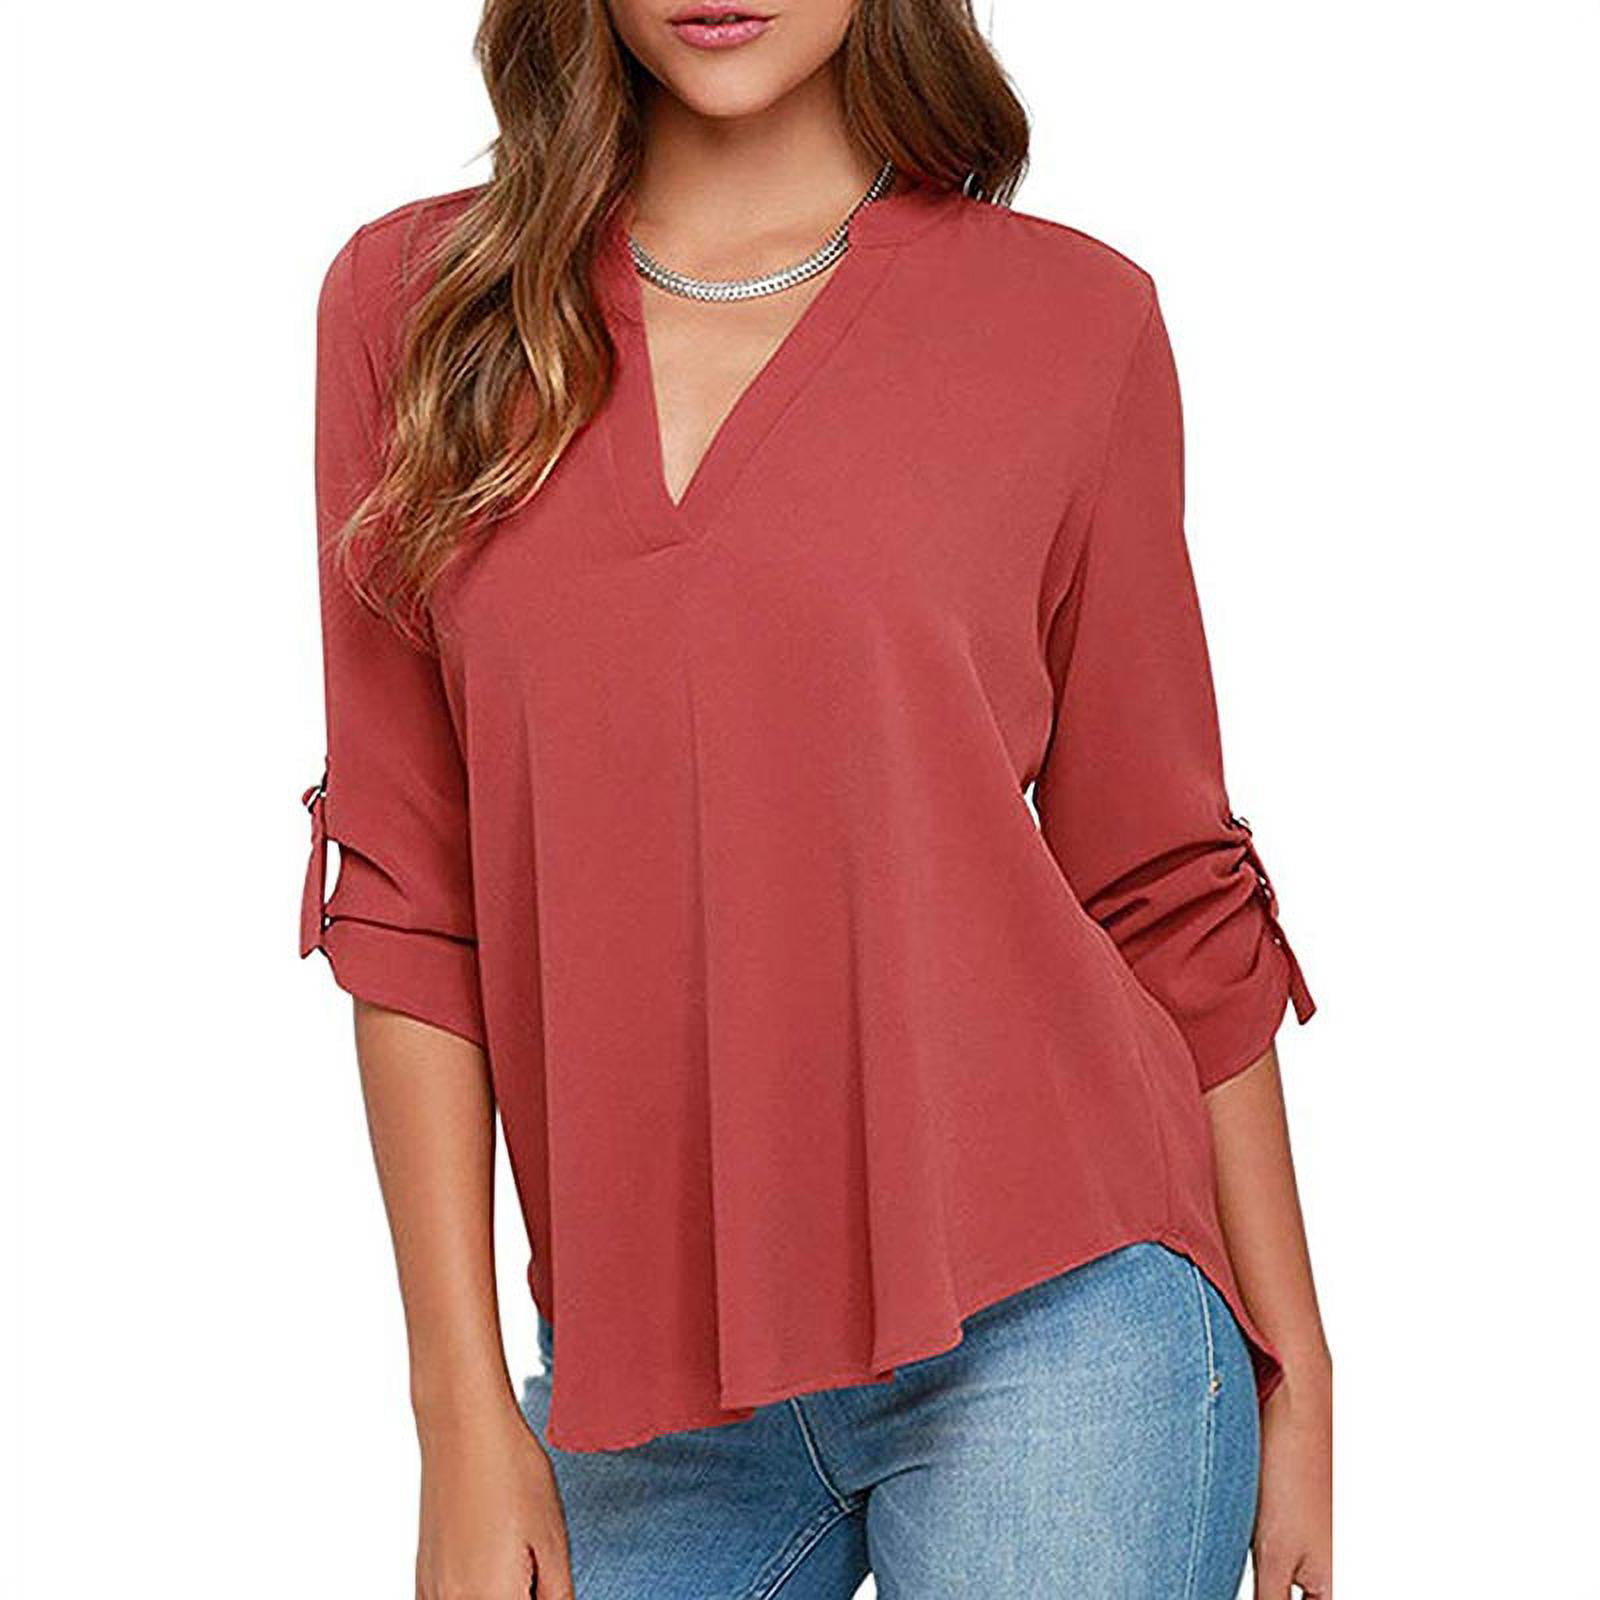 Women's Casual V Neck Cuffed Sleeves Solid Chiffon Blouse Top